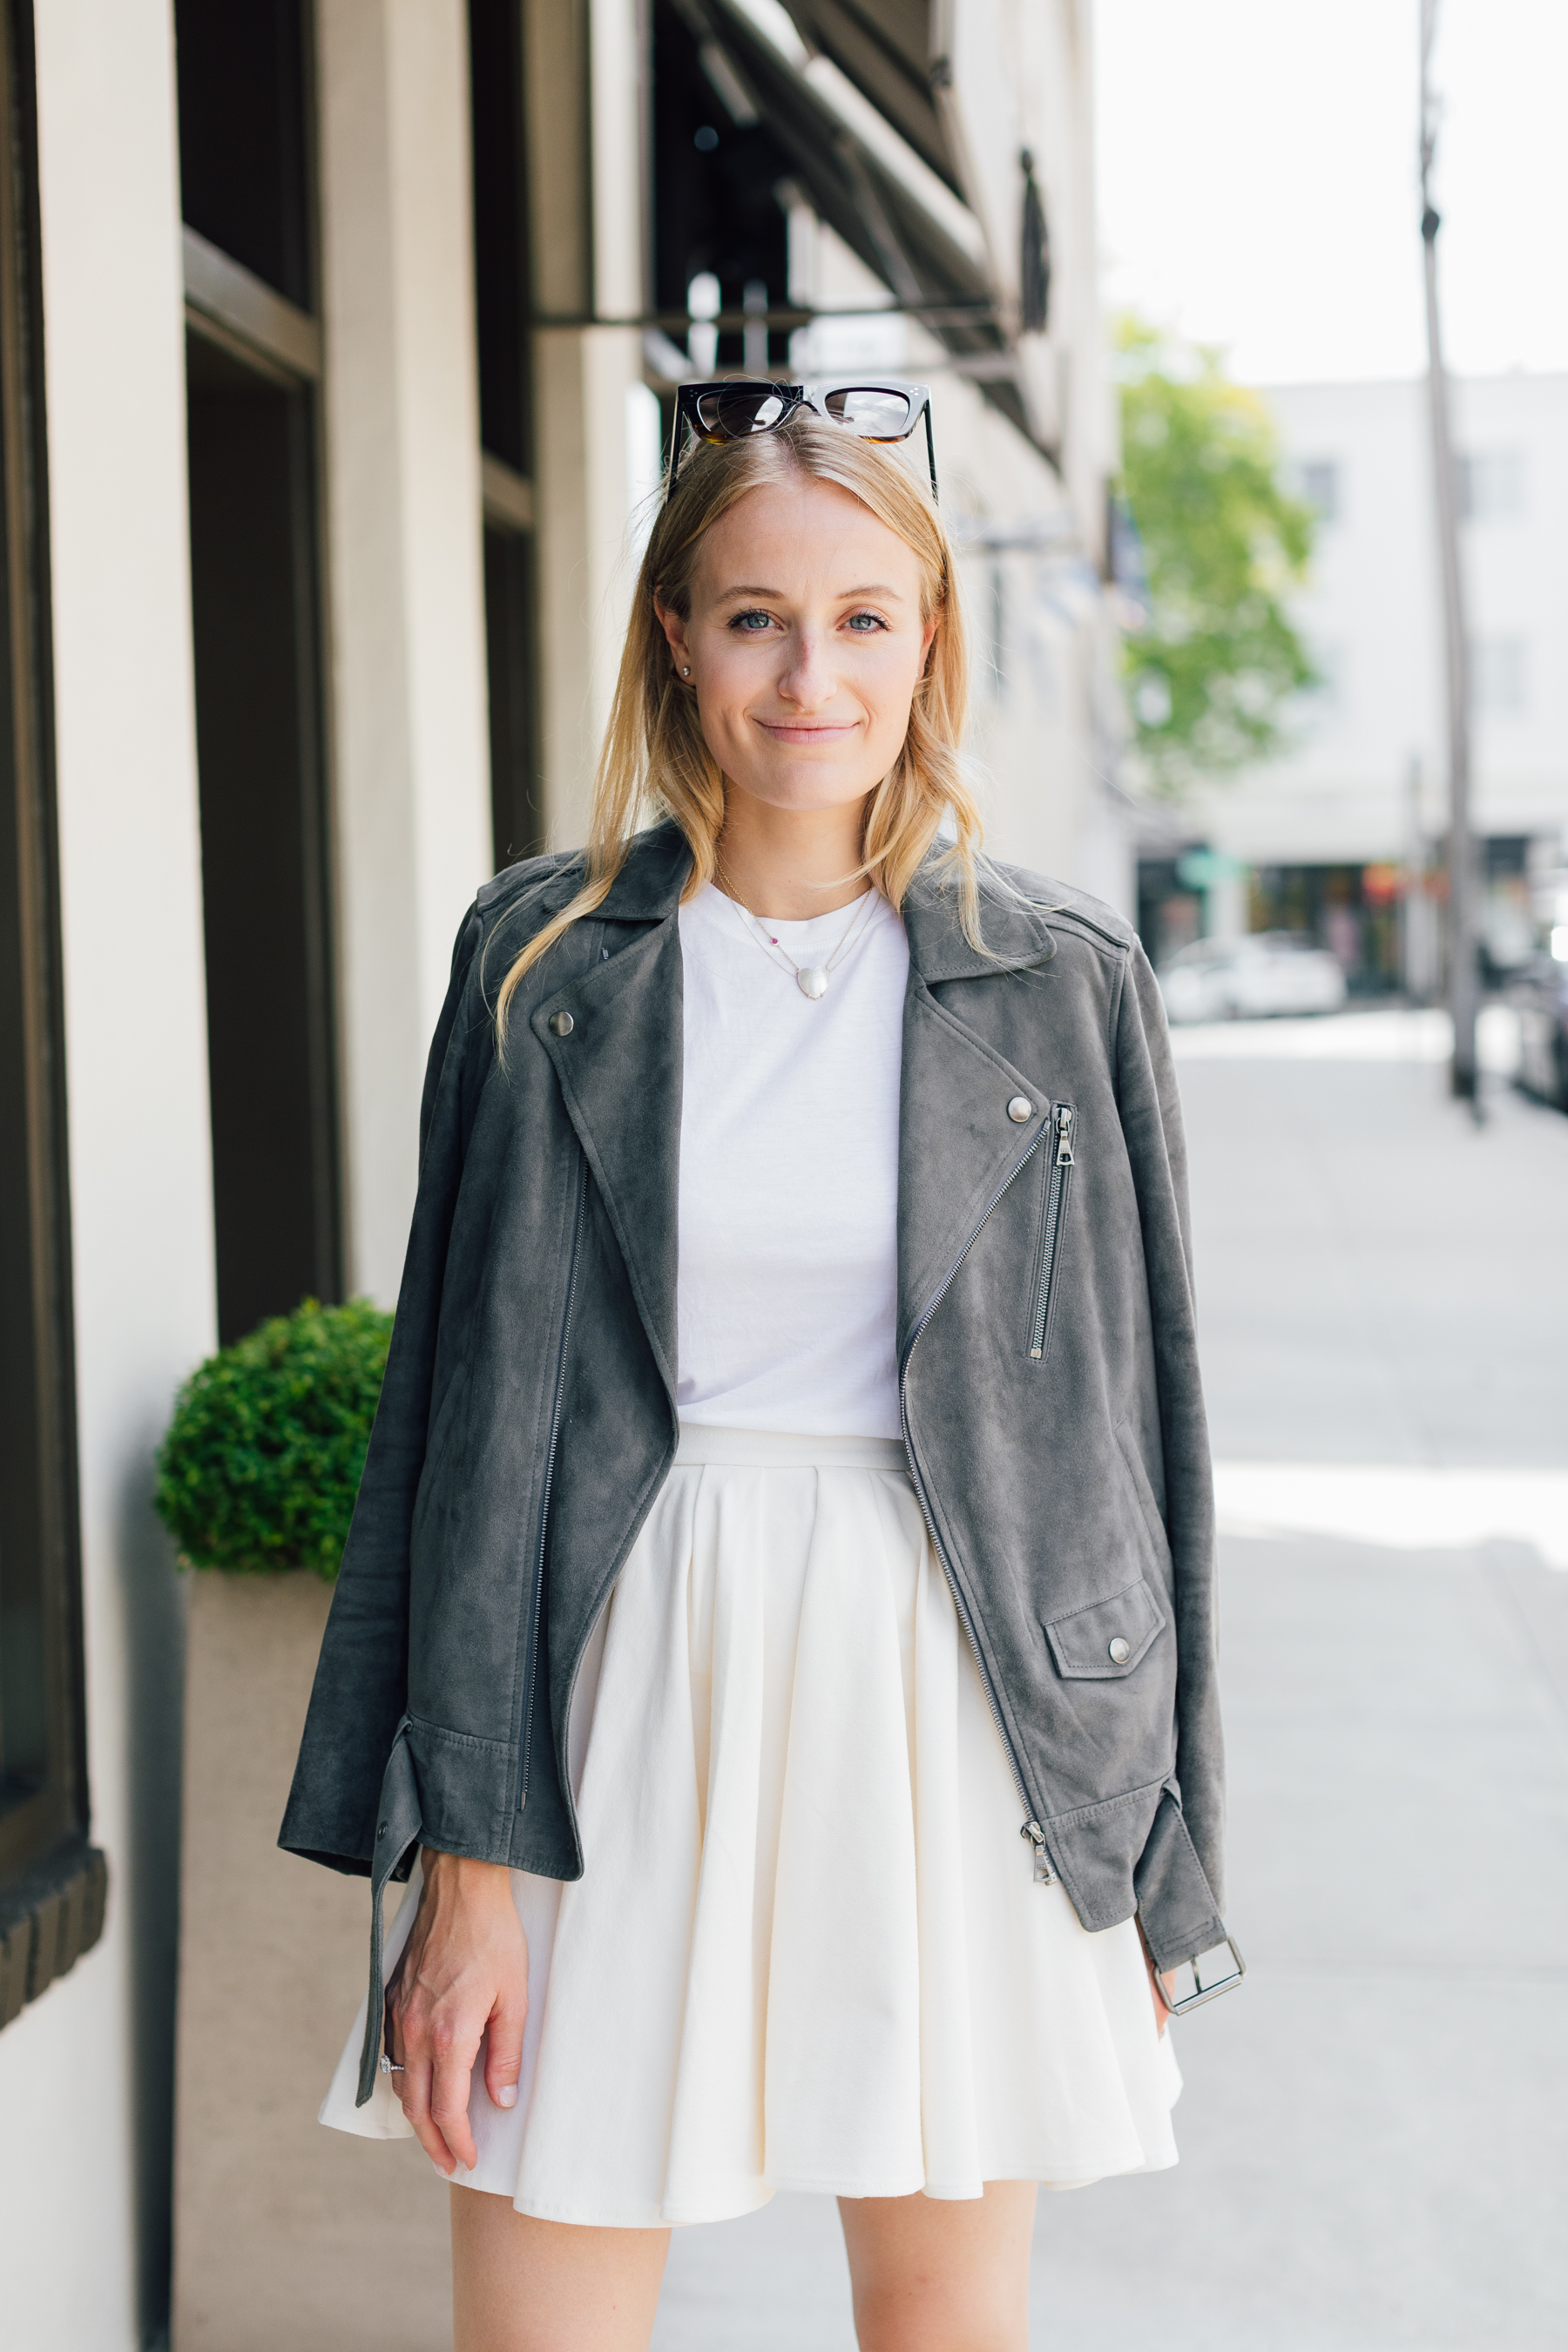 Mini skirt from H&M with a gray suede moto jacket // the girl guide // stephanie trotta